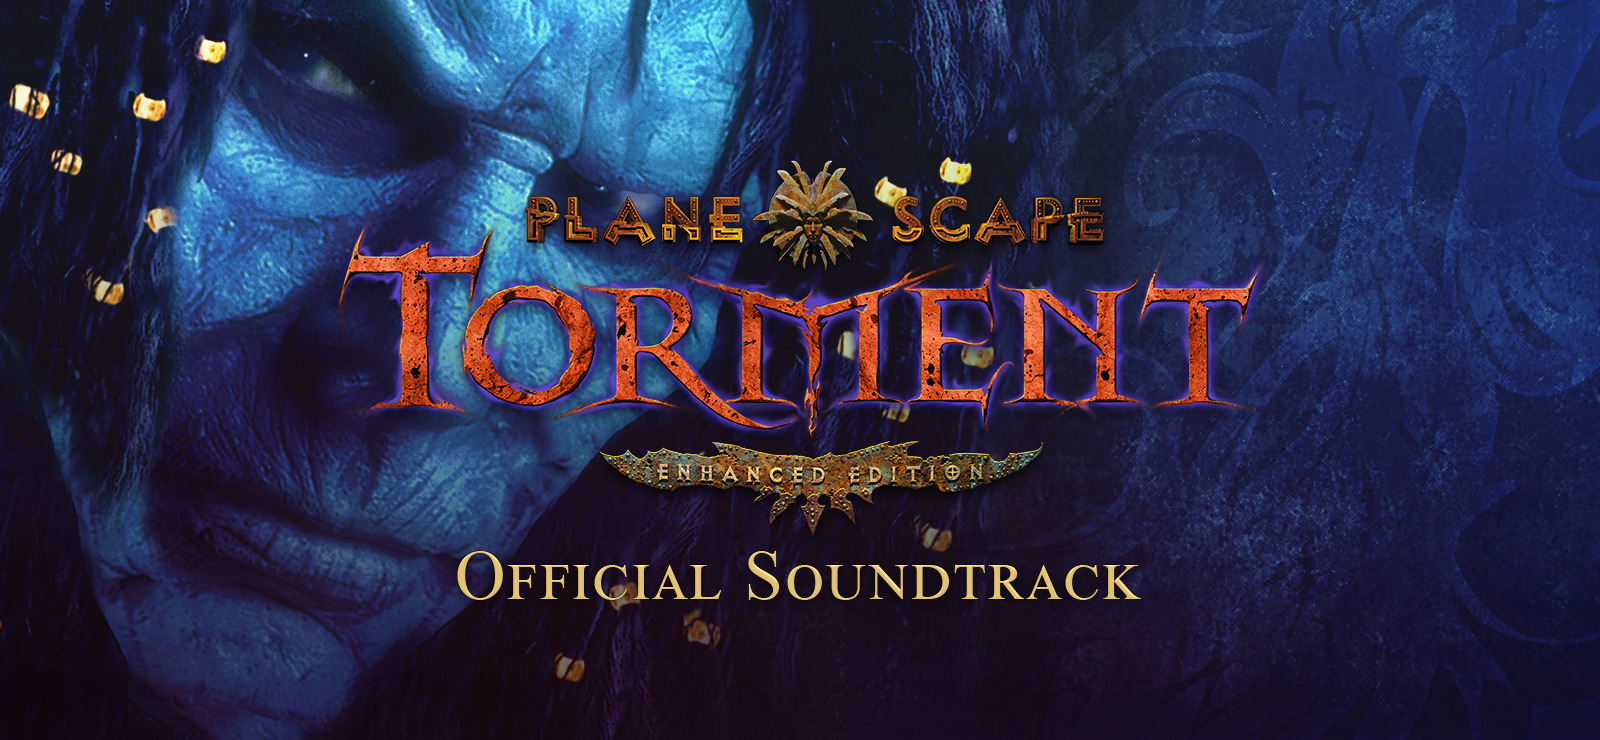 Official Enhanced Edition on Torment: Planescape: Soundtrack